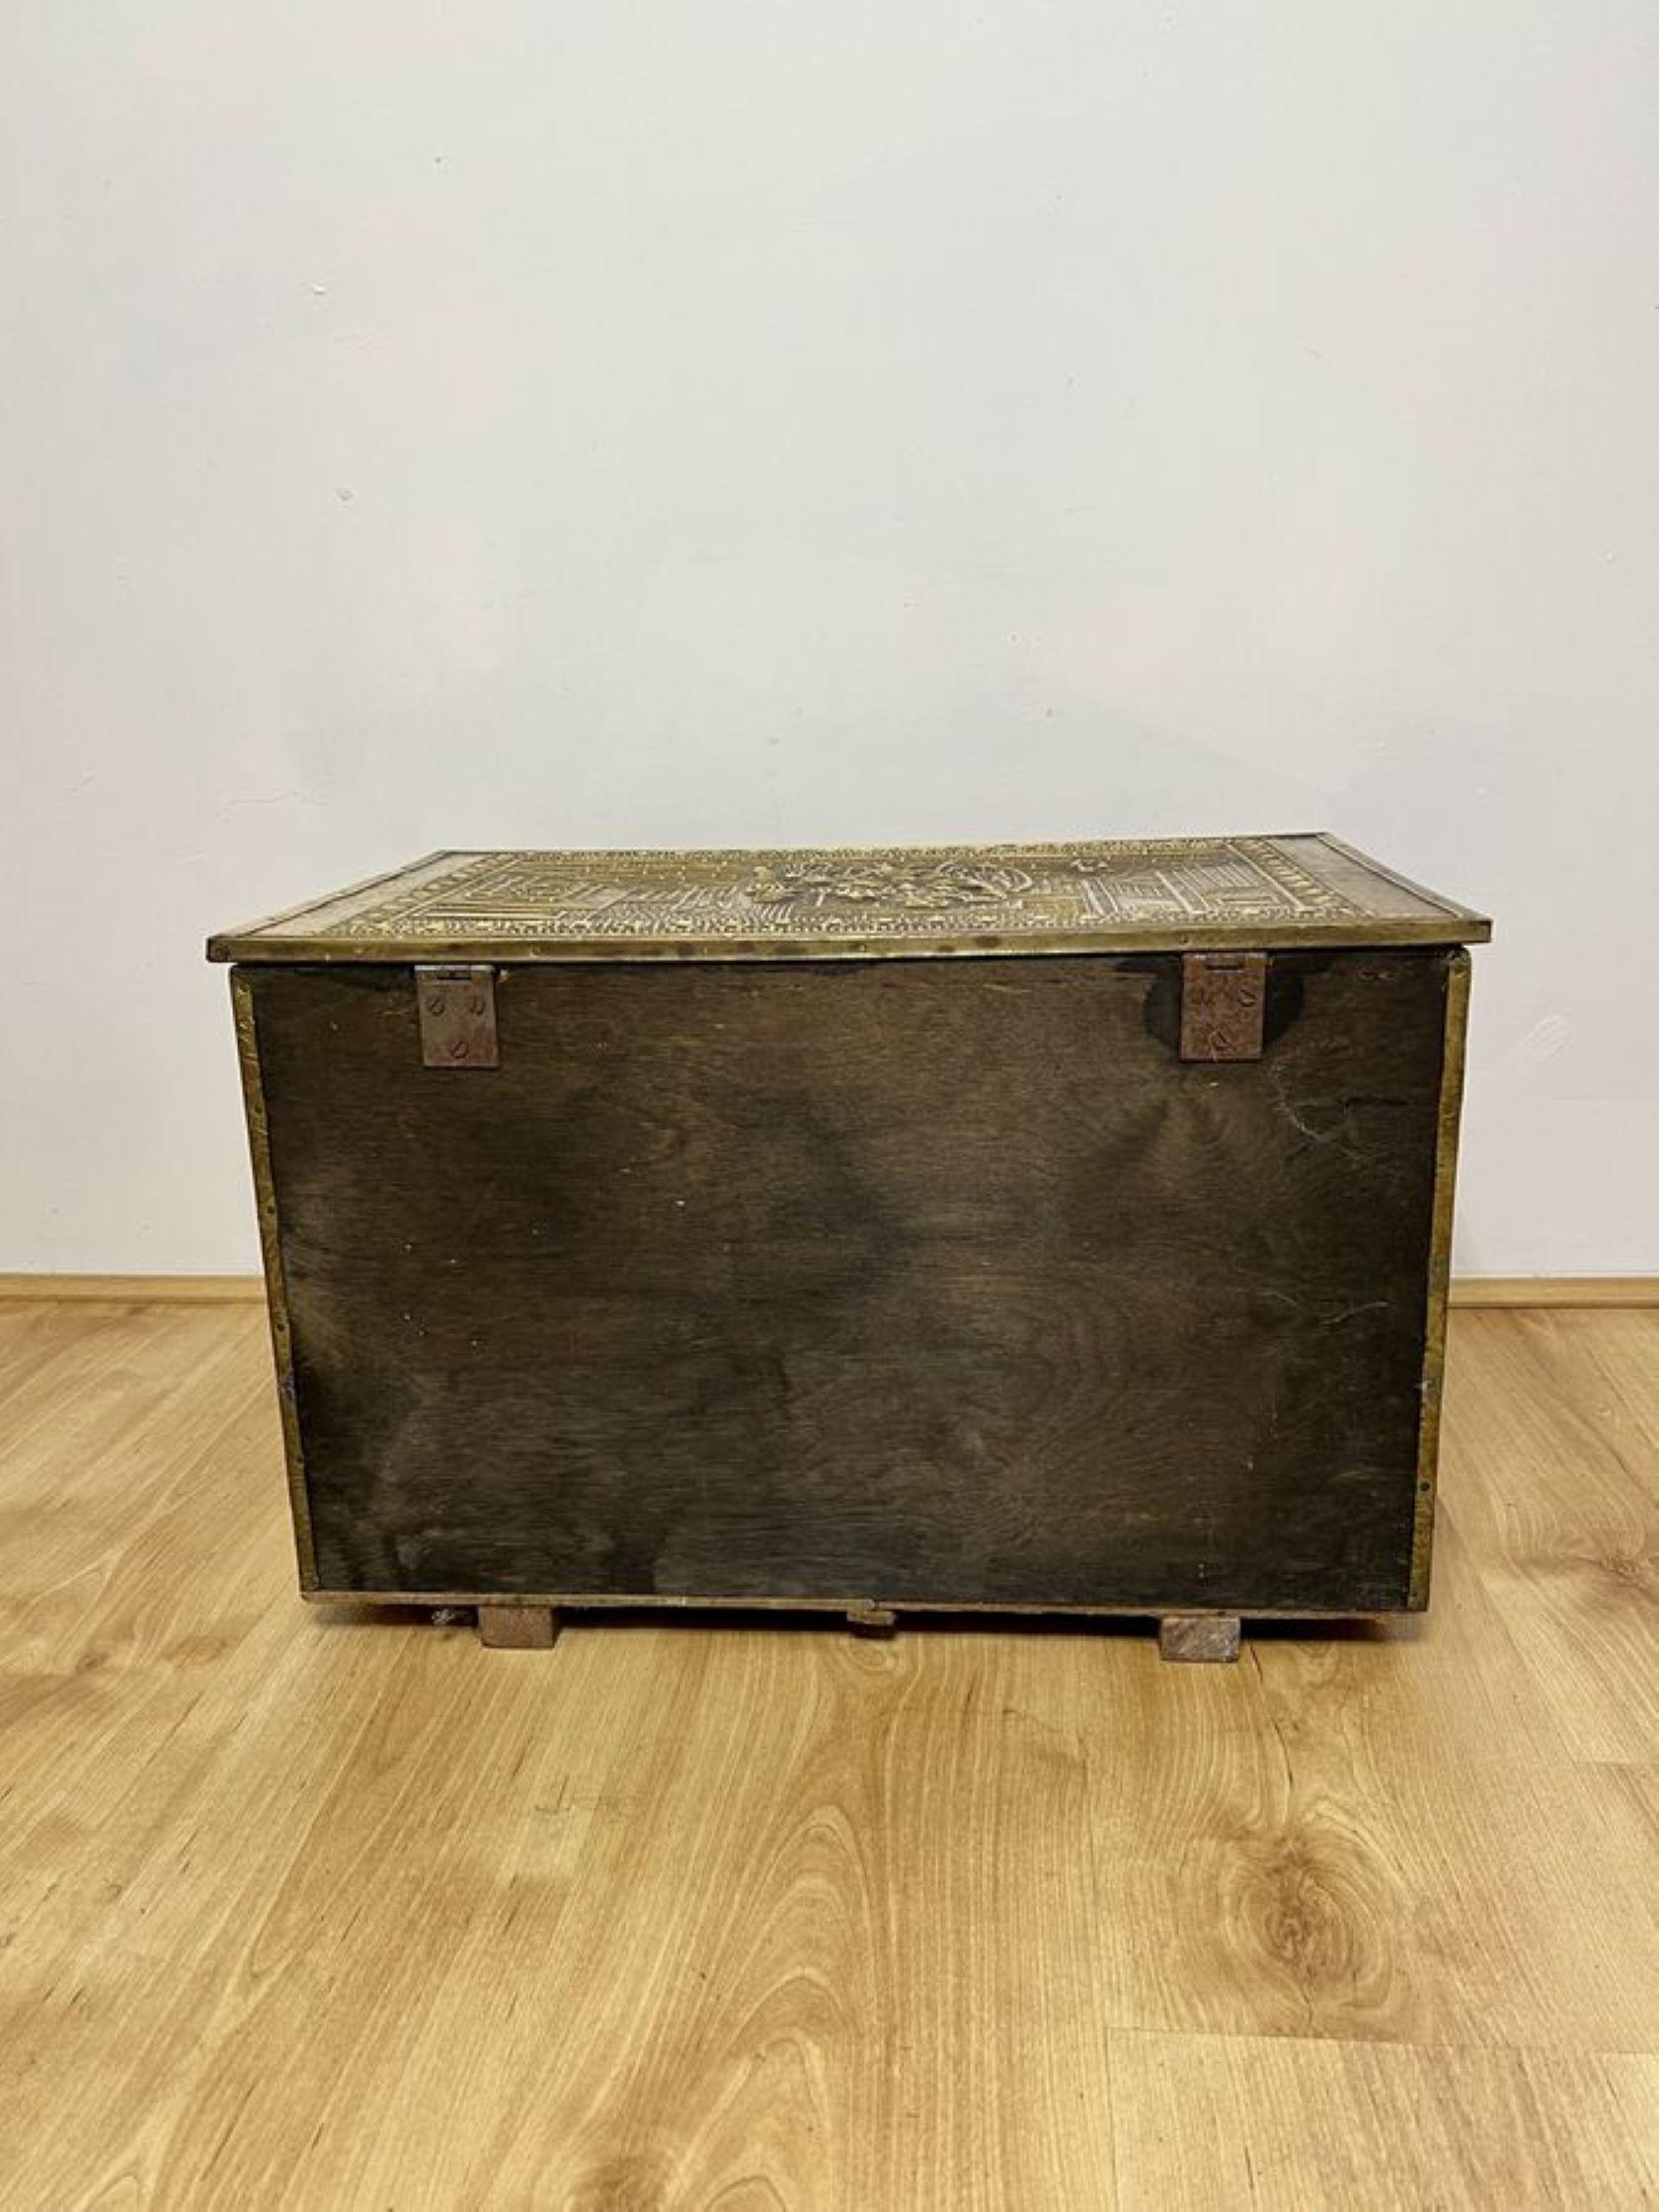 Brass Antique quality ornate brass coal box For Sale